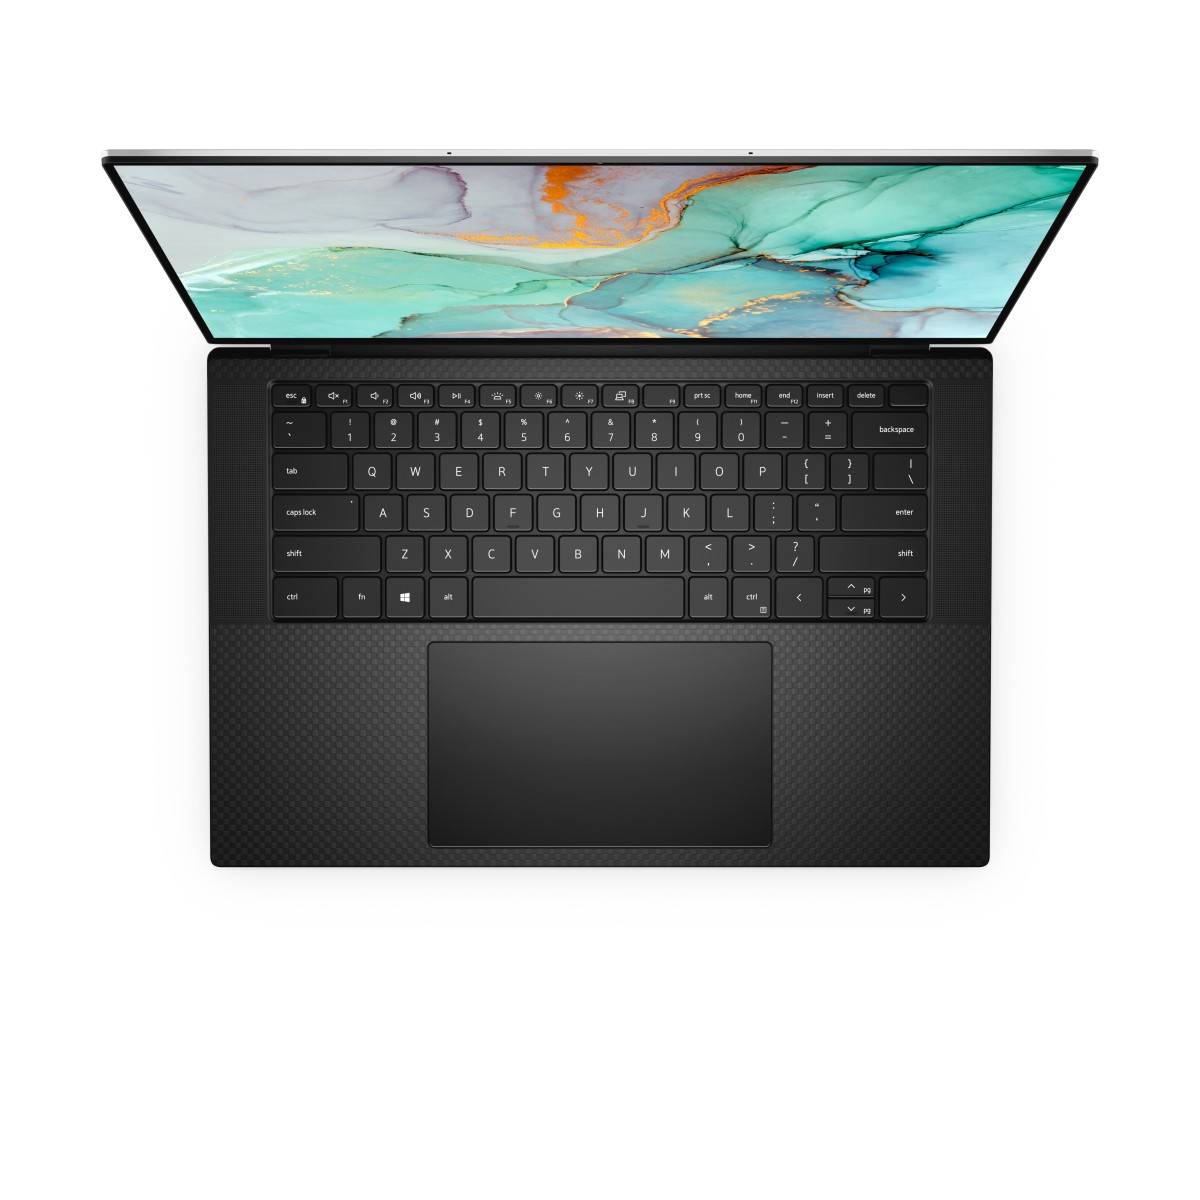 Dell XPS 15 top down in black